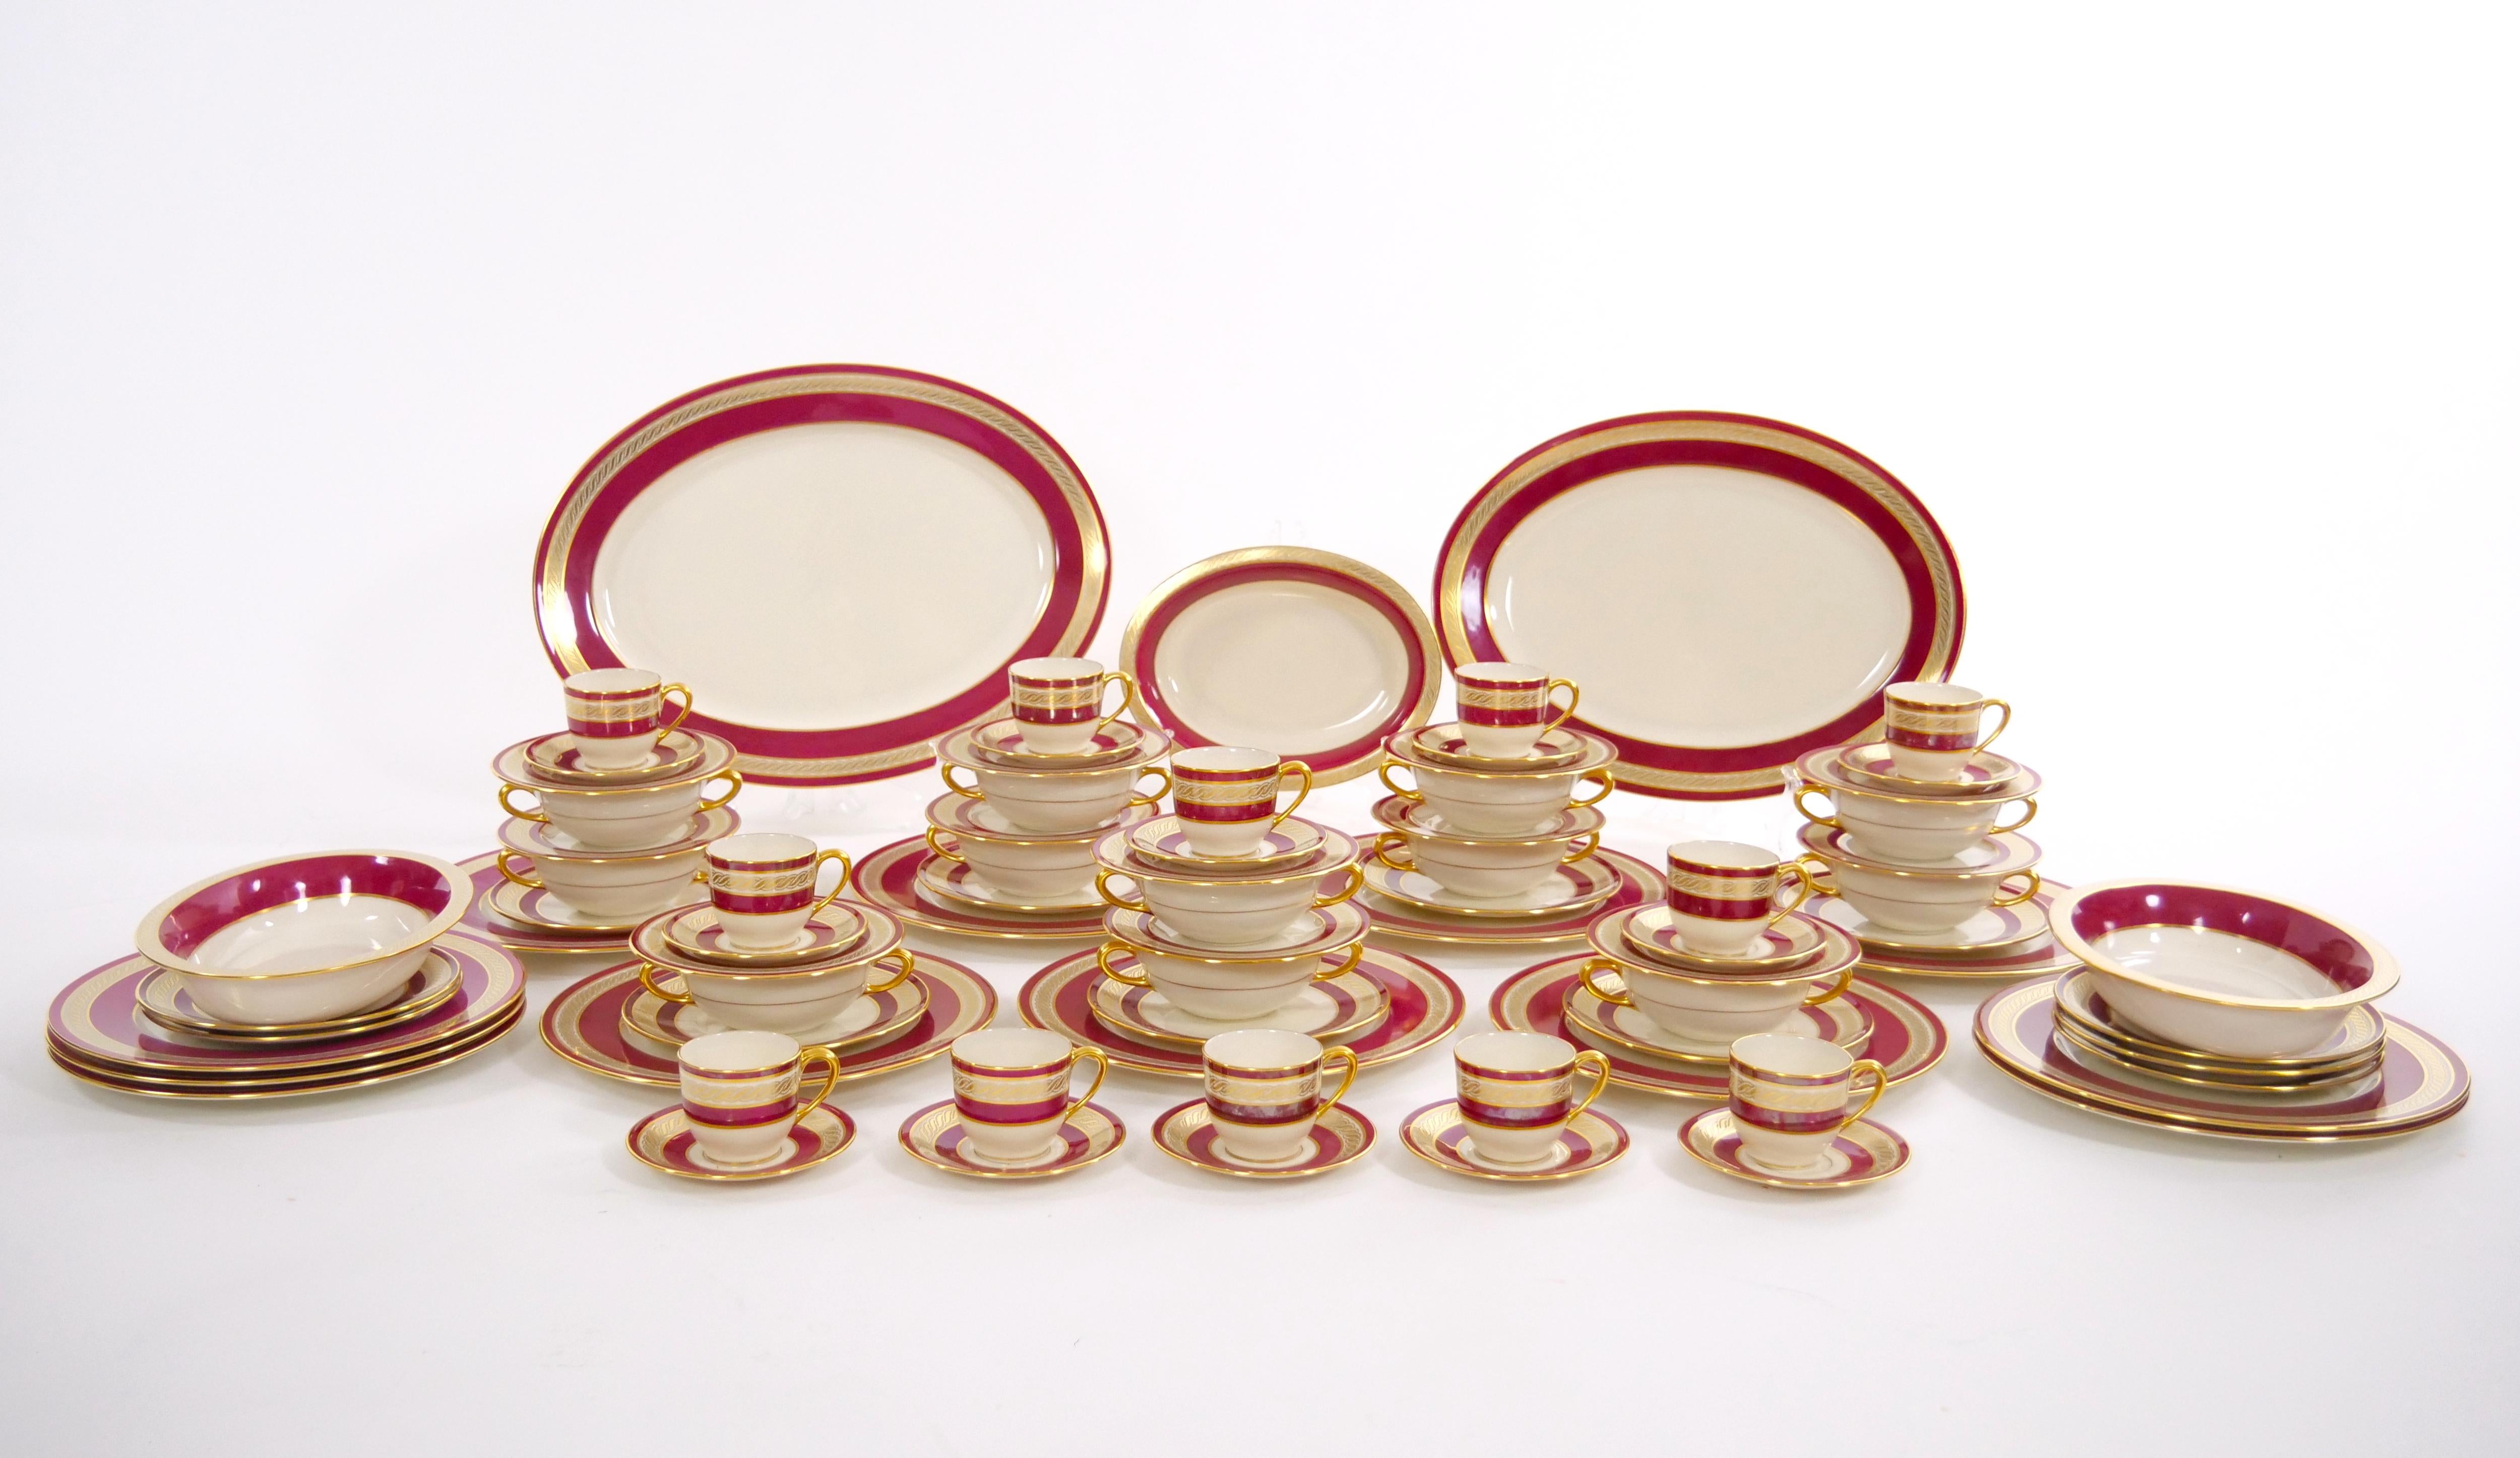 American Porcelain/Gilt Braid Decorated By Lenox for J.E Caldwell Dinner Set For Sale 8